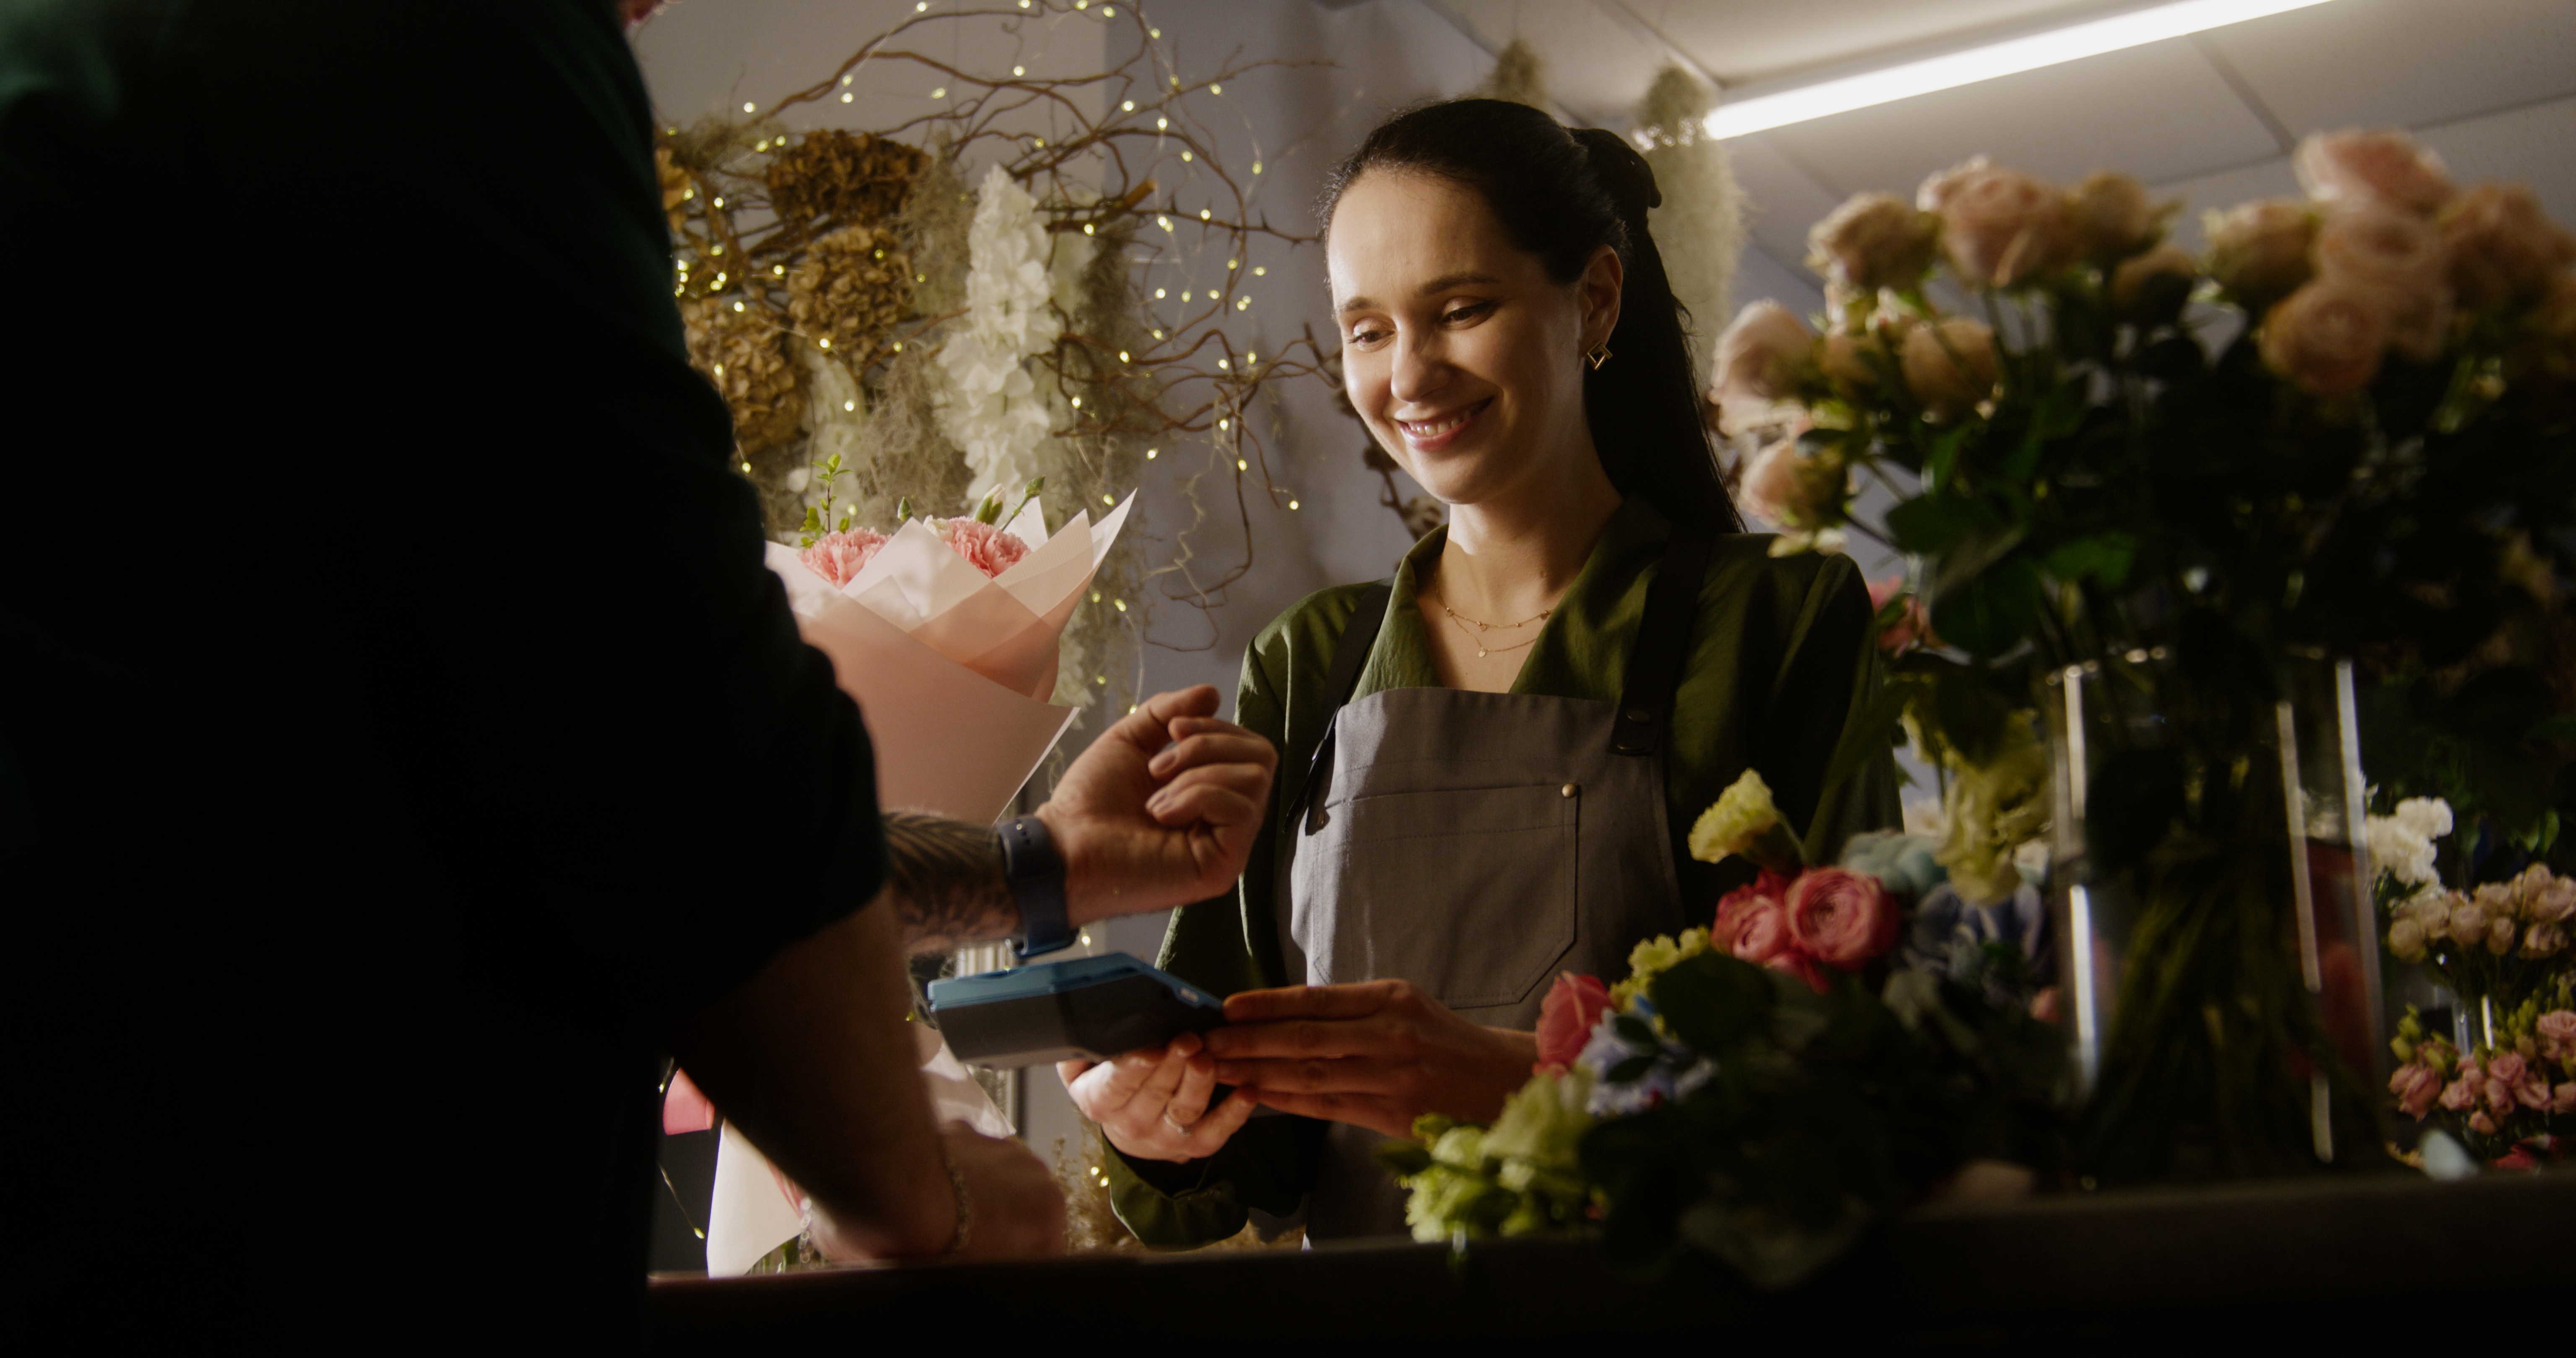 Man buys spring bouquet in flower shop and pays for purchase with contactless payment using smart watch. | Source: Shutterstock